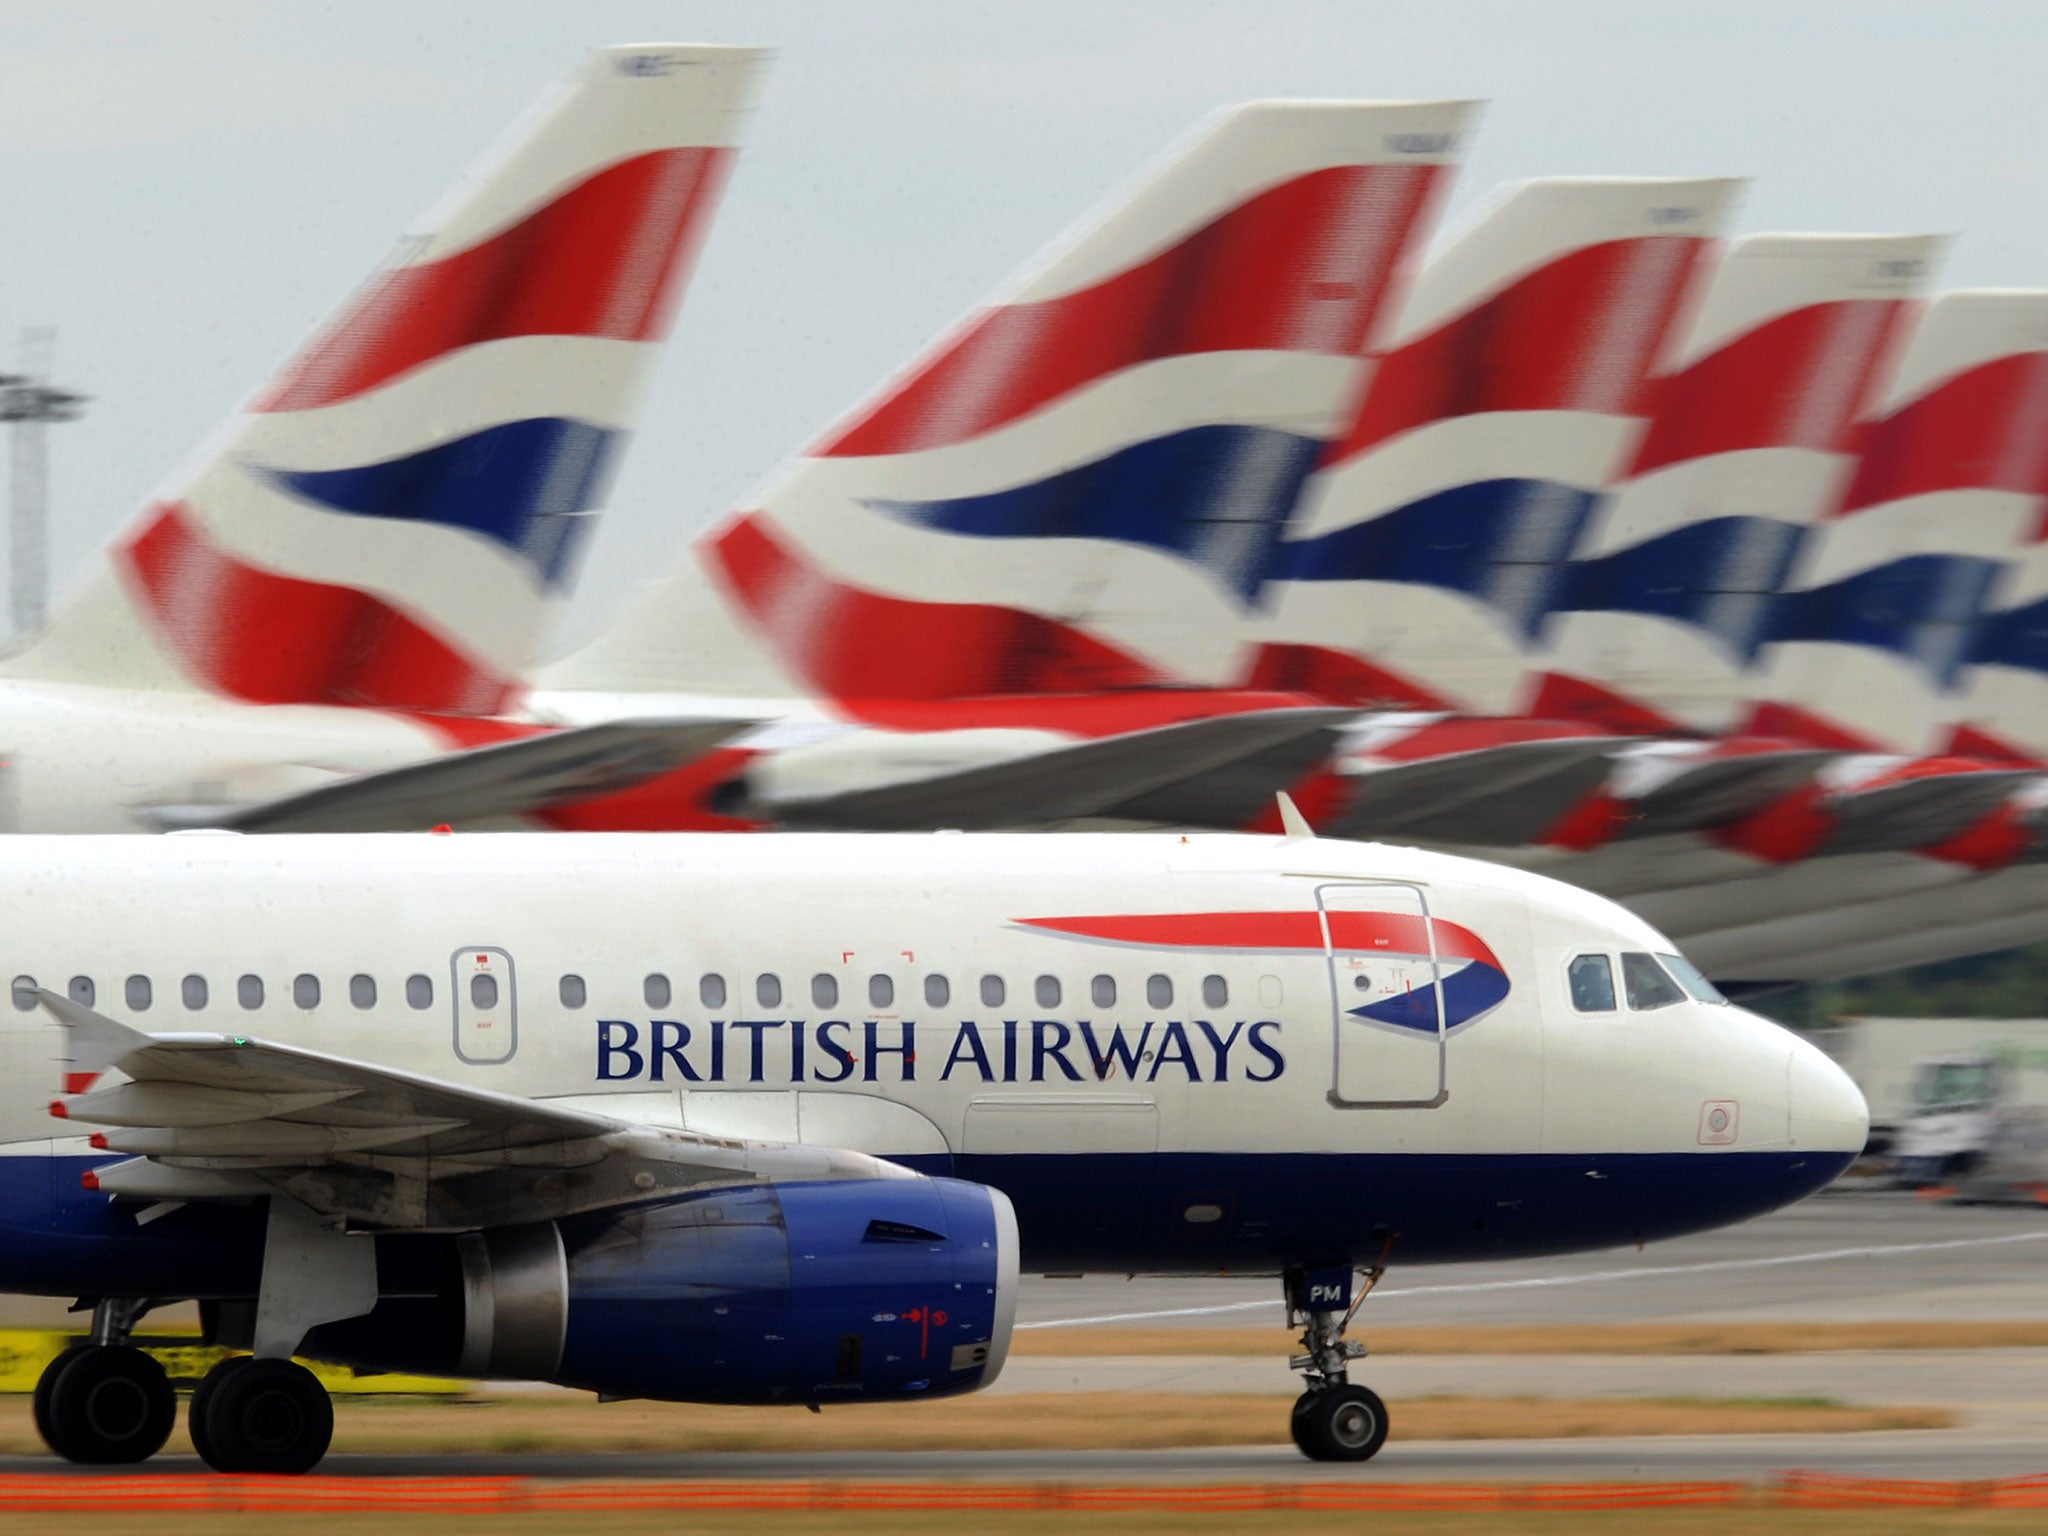 BA’s pension scheme has total liabilities of £29.2bn, and its assets are valued at £29.3bn, meaning that it is, just, in surplus